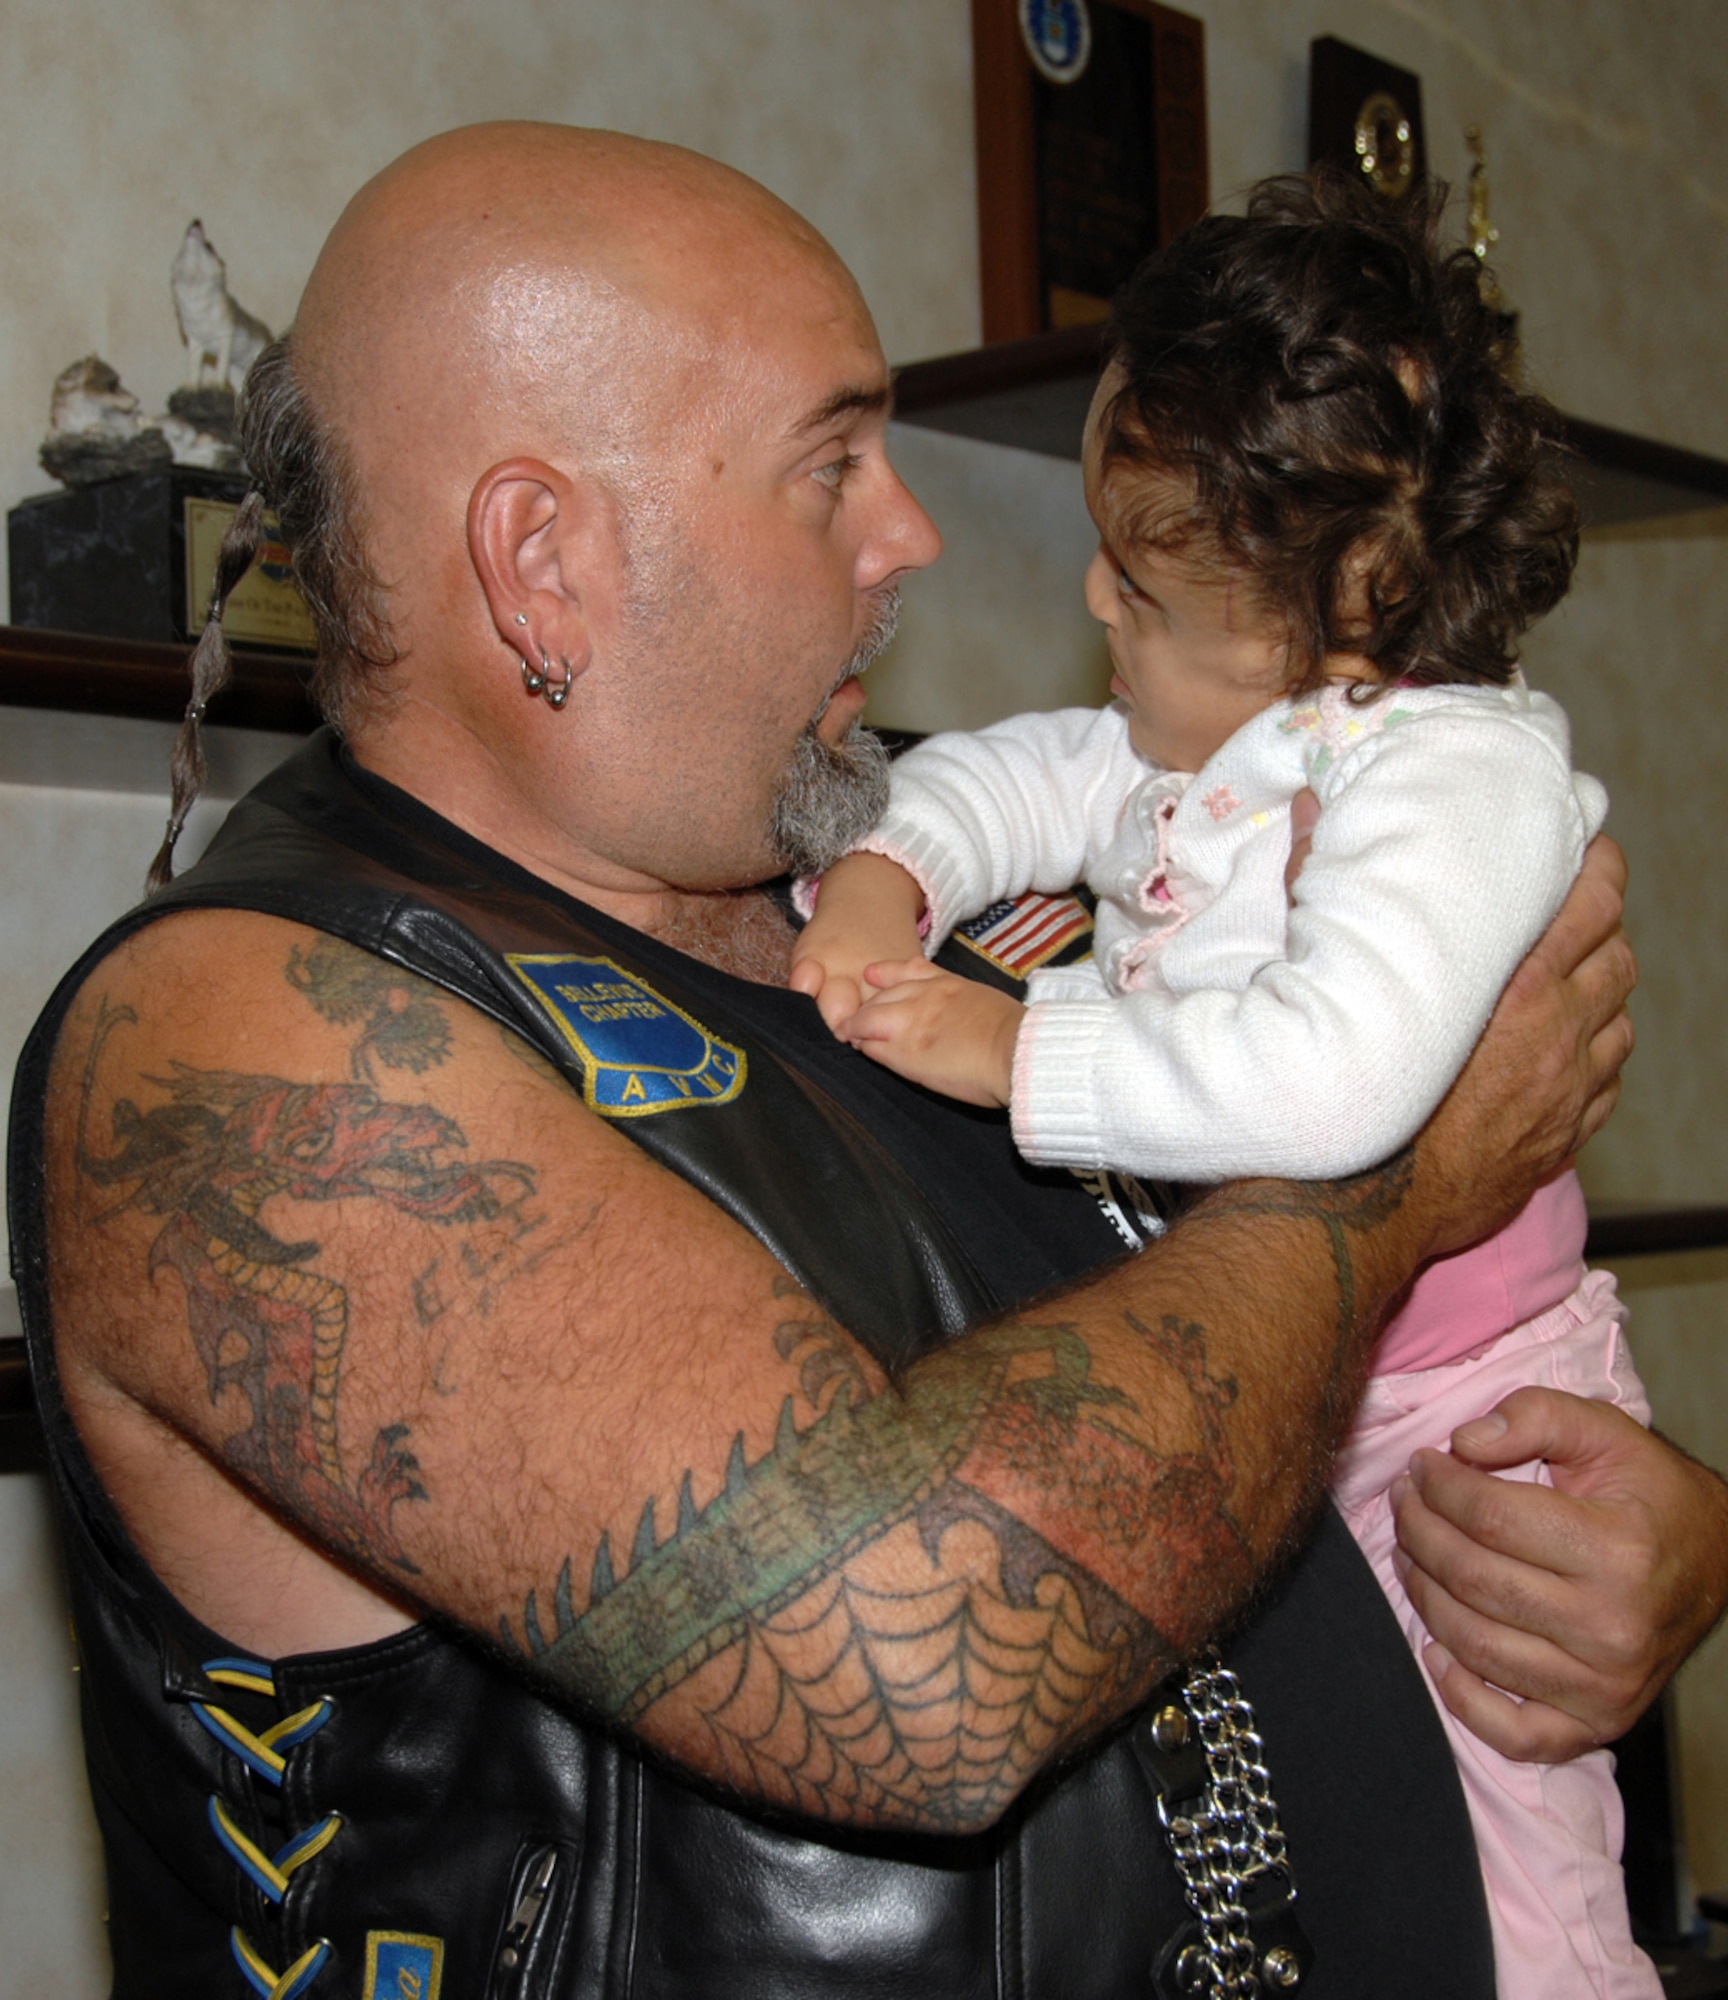 James Whitmire, president for Bellevue’s Chapter of the American Veterans Motorcycle Club, spends some time with Lorilei Todd, daughter of 1st Lt. Matthew and Monica Todd, recently. The AVMC raises money each year through a poker run to donate to military families with hardships. (U.S. Air Force Photo By Kendra Williams)